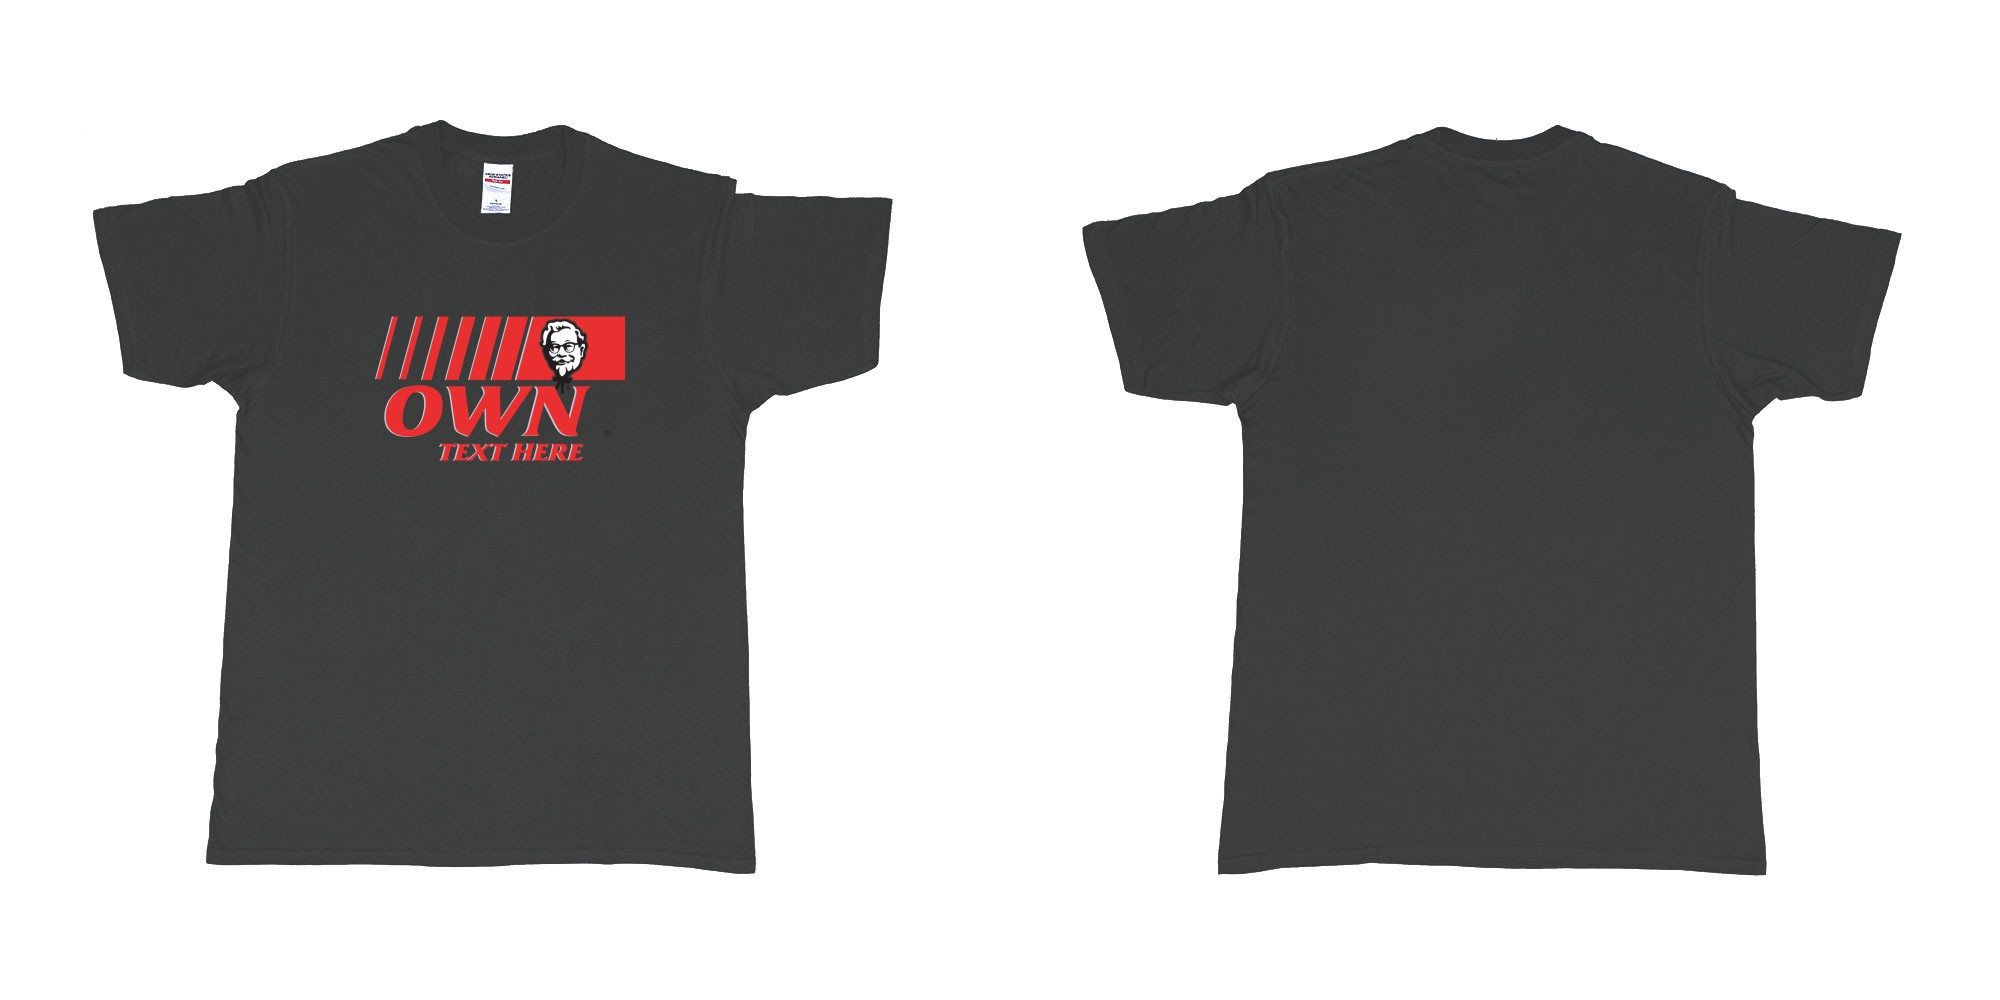 Custom tshirt design KFC in fabric color black choice your own text made in Bali by The Pirate Way